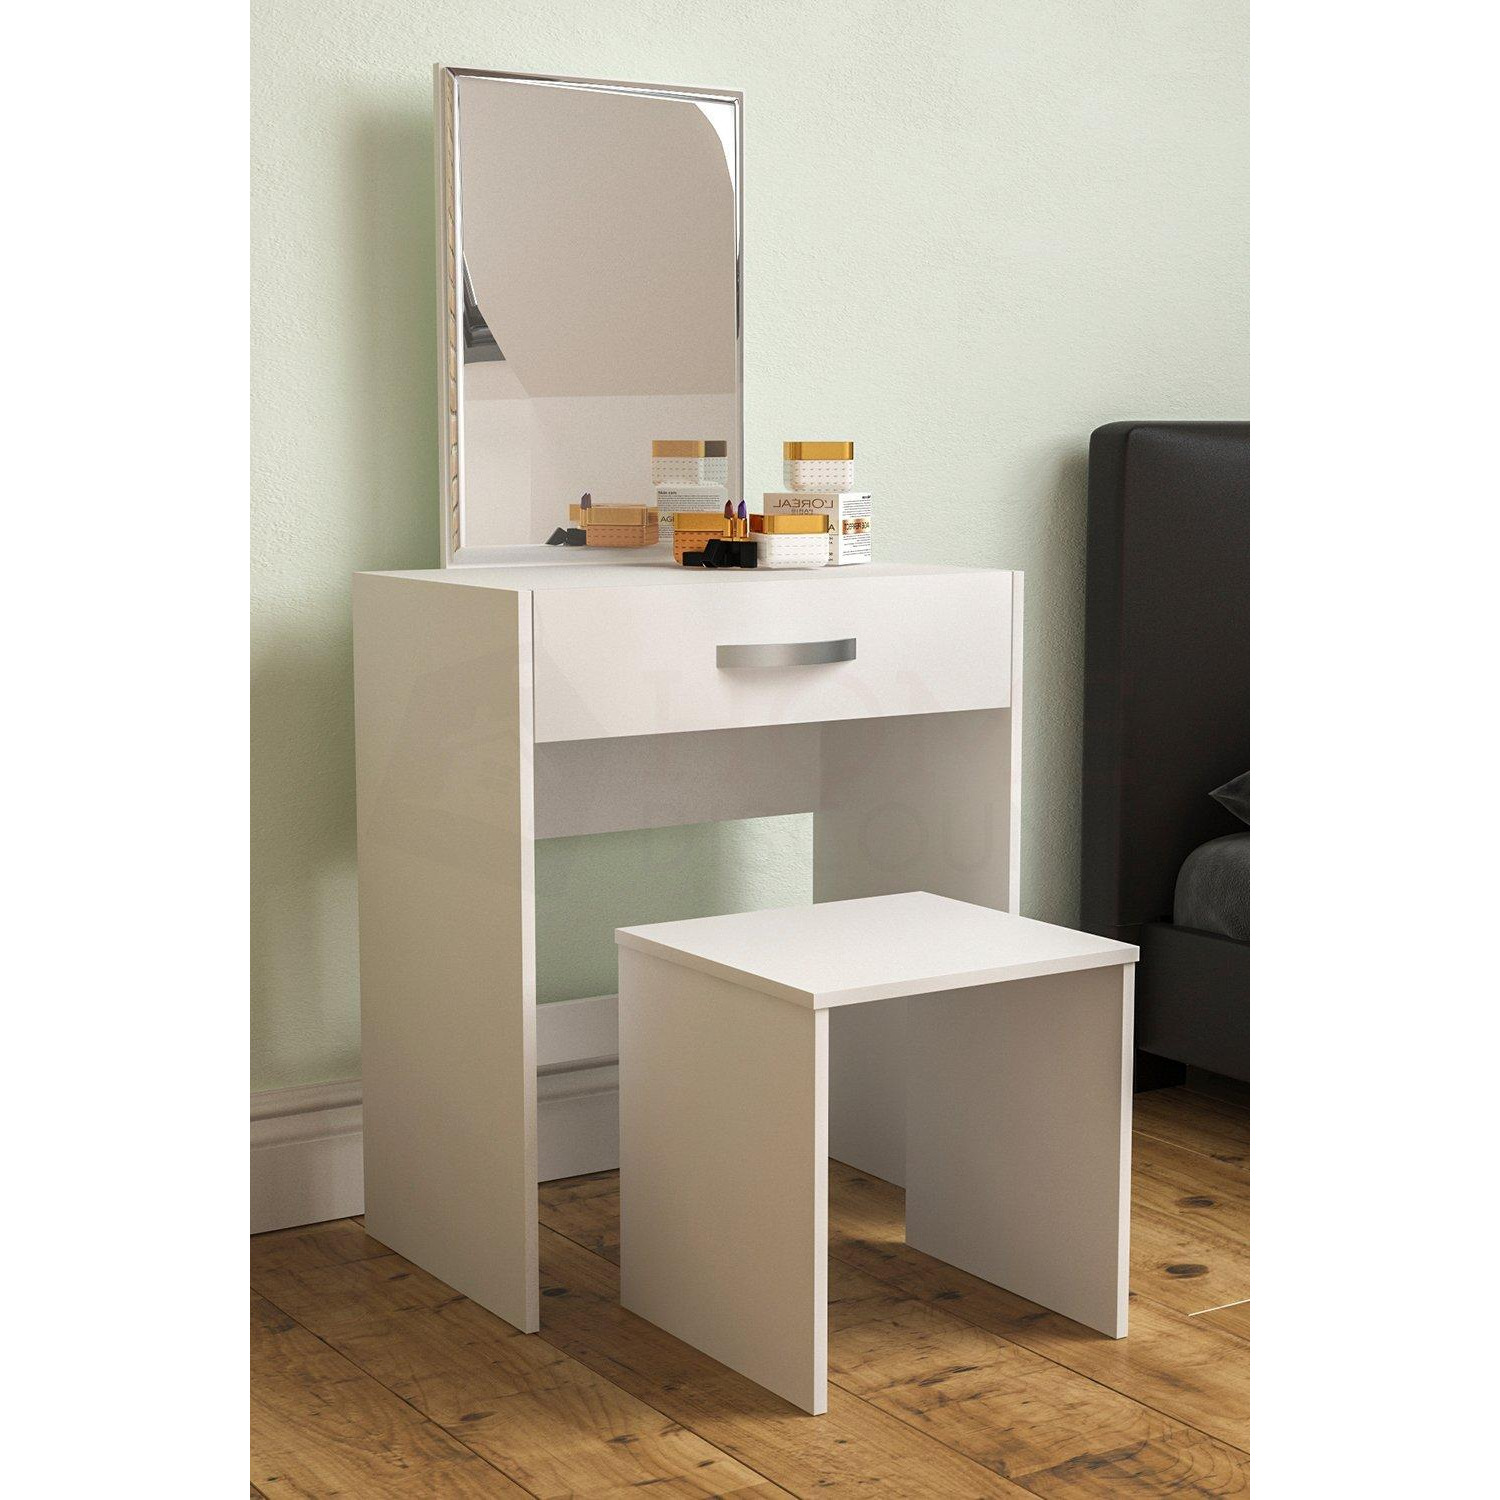 Vida Designs Isla Dressing Table Set with Built-in Mirror And Stool - image 1